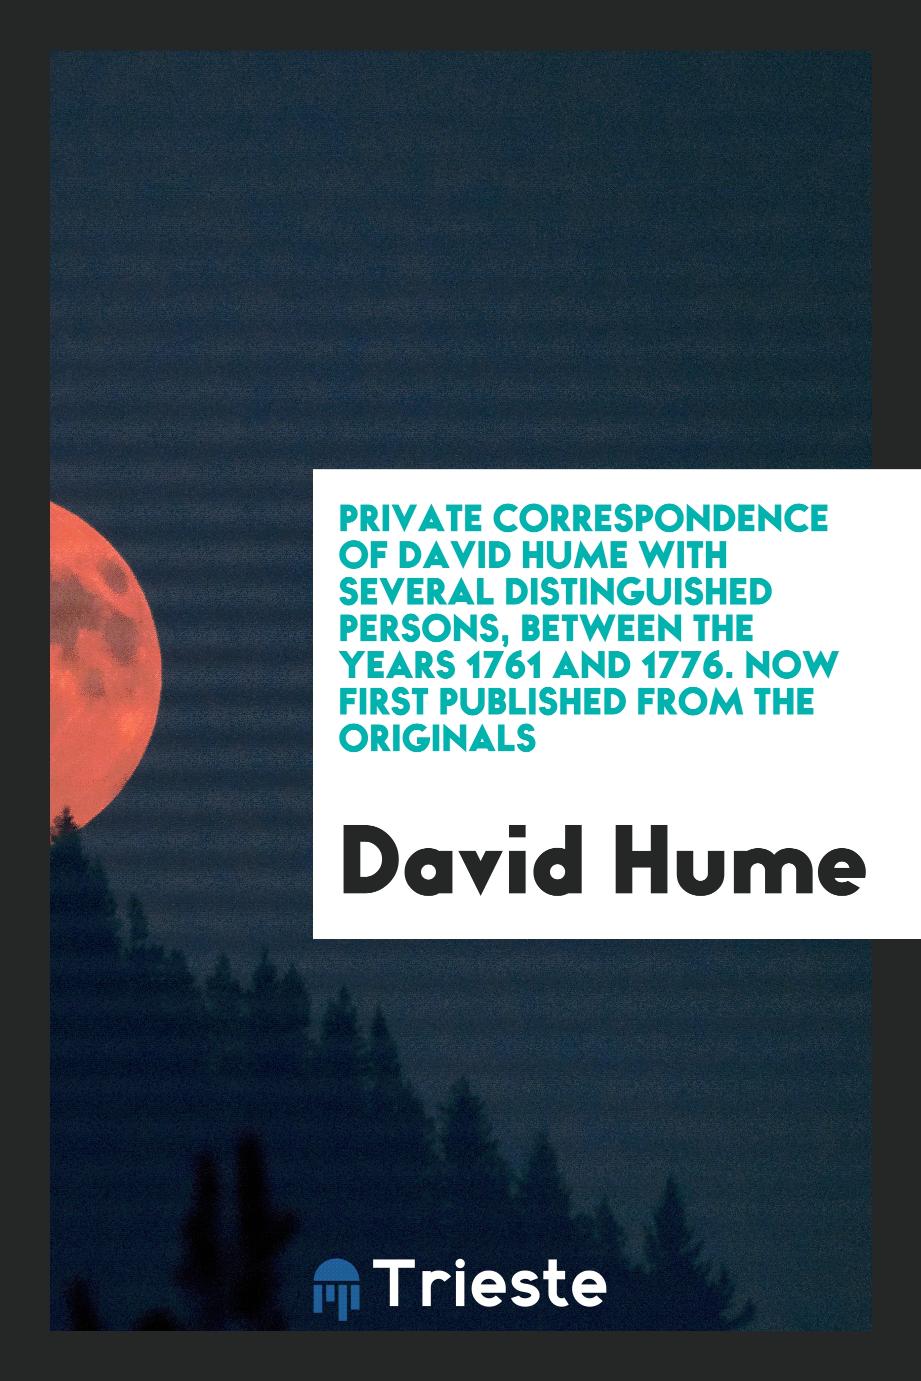 Private Correspondence of David Hume with Several Distinguished Persons, Between the Years 1761 and 1776. Now First Published from the Originals